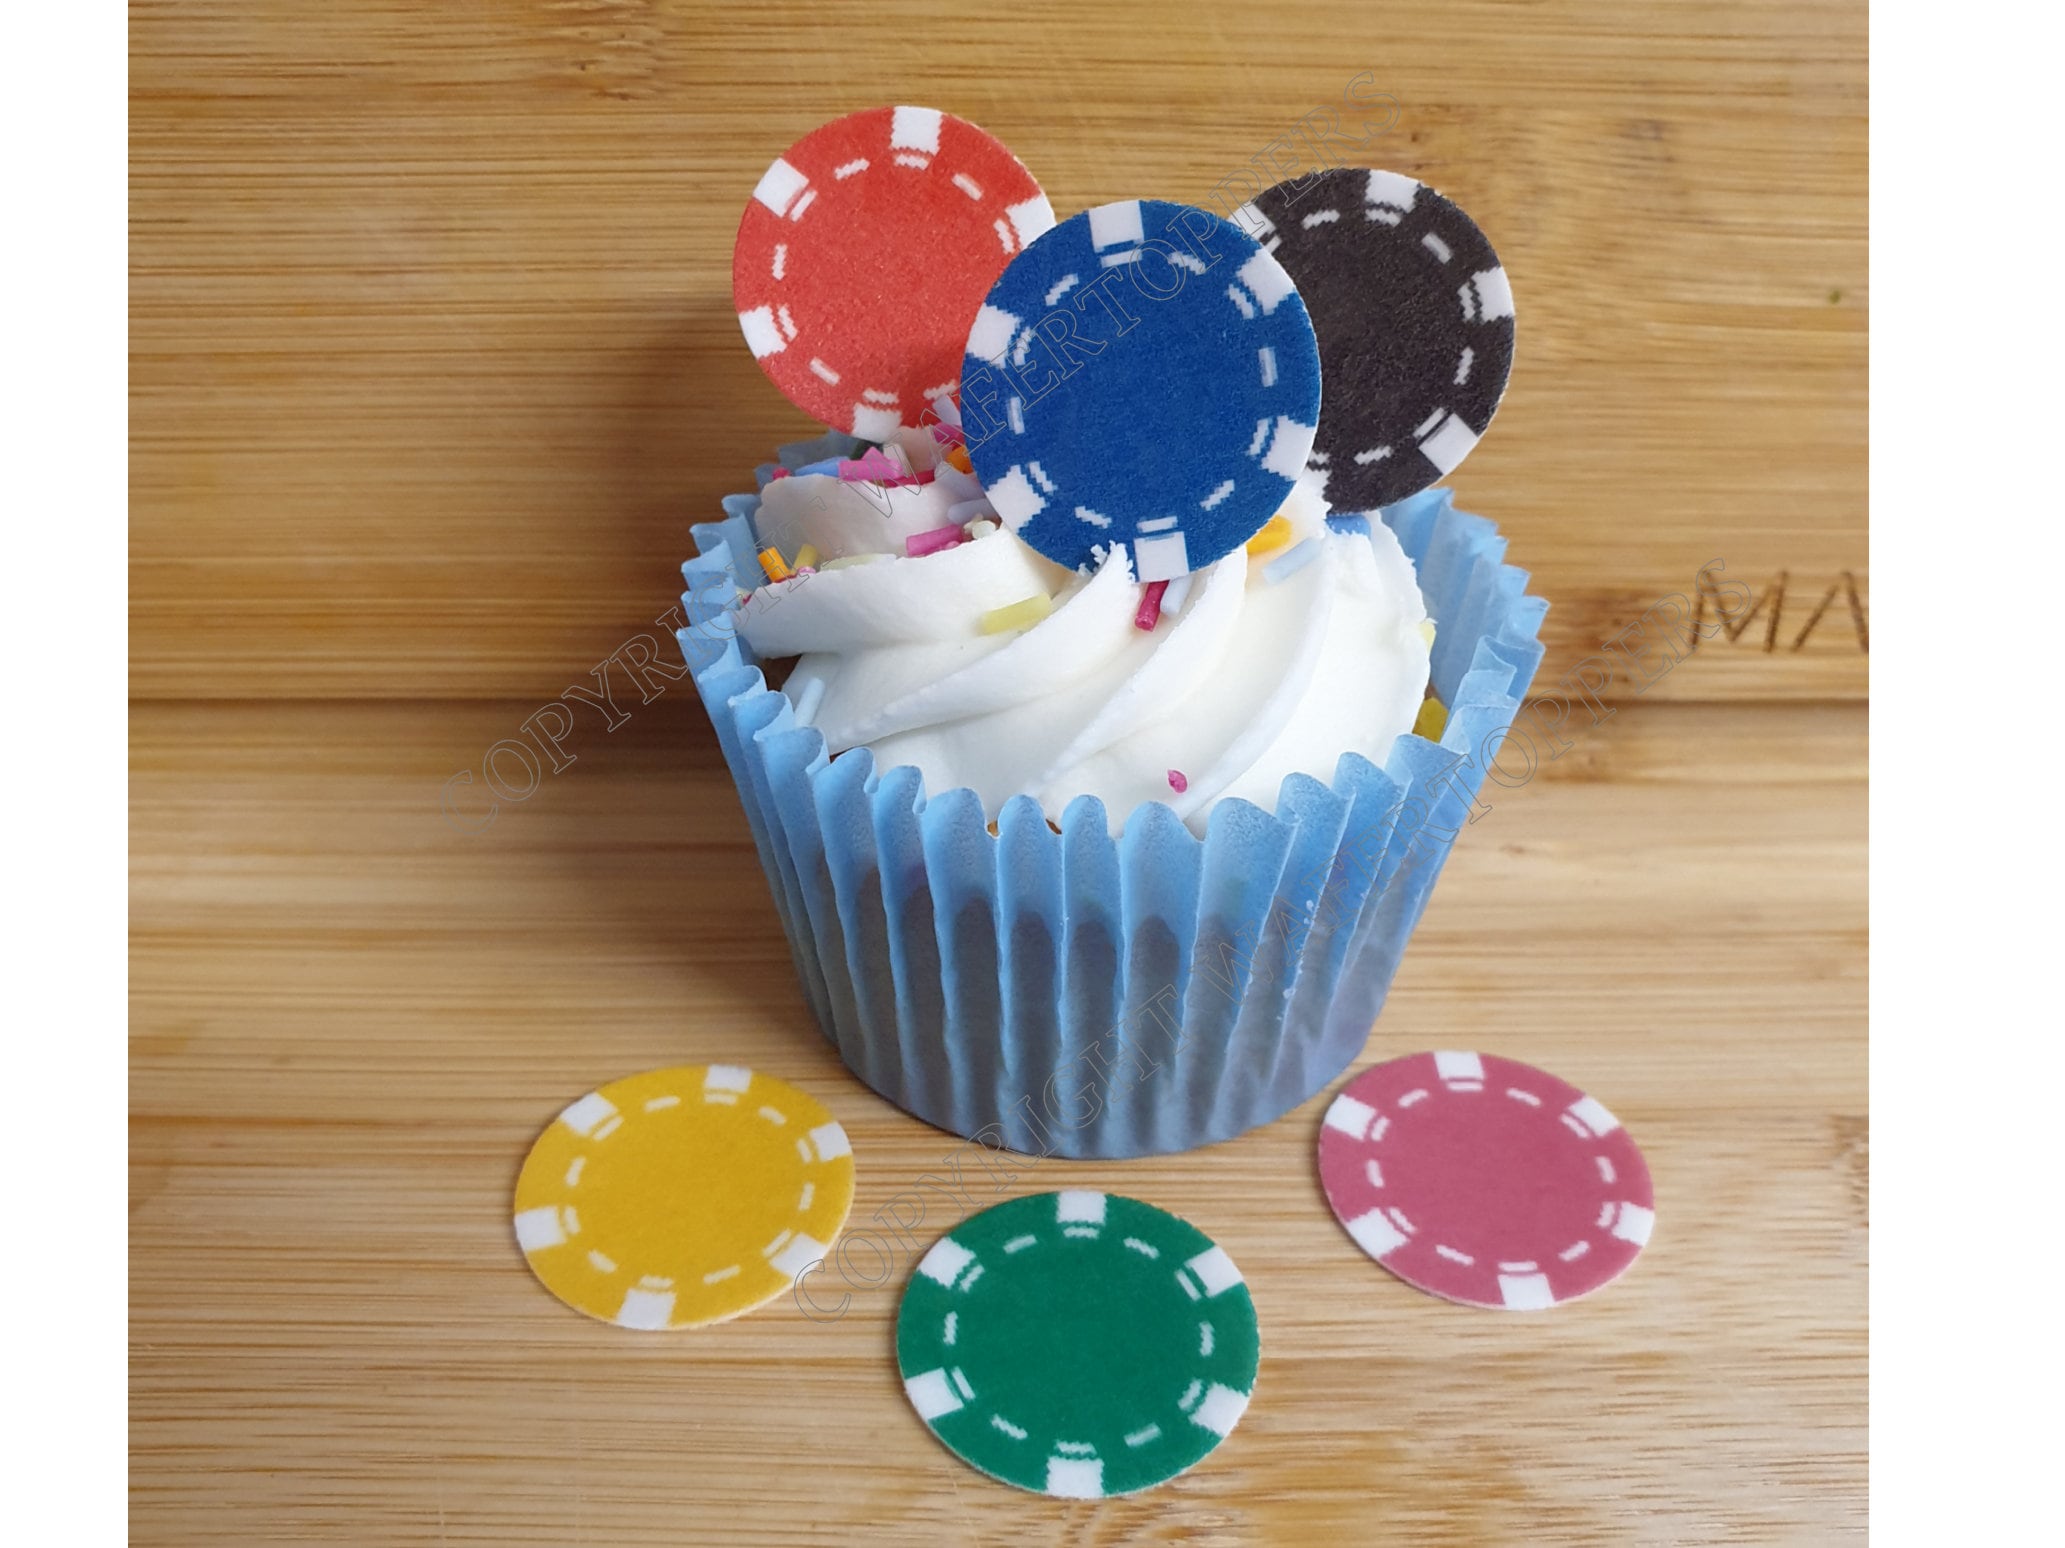 Casino muffin cake image topper party decoration gift Vegas poker cards  edible